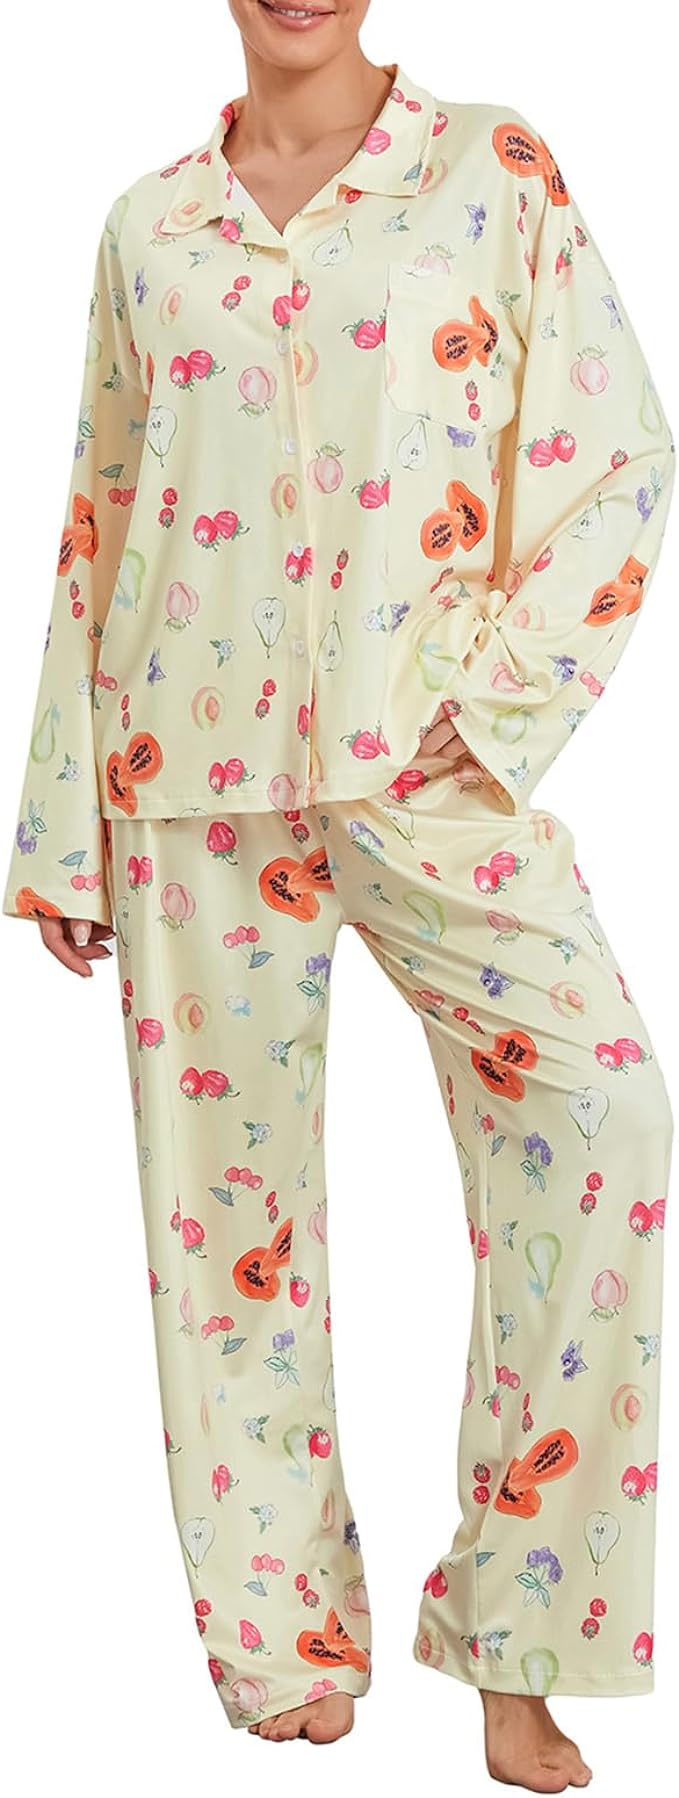 Women Y2K 2 Piece Floral Lounge Set Long Sleeve Button Down Shirt Wide Leg Palazzo Pants Outfits Matching Sets Pajamas